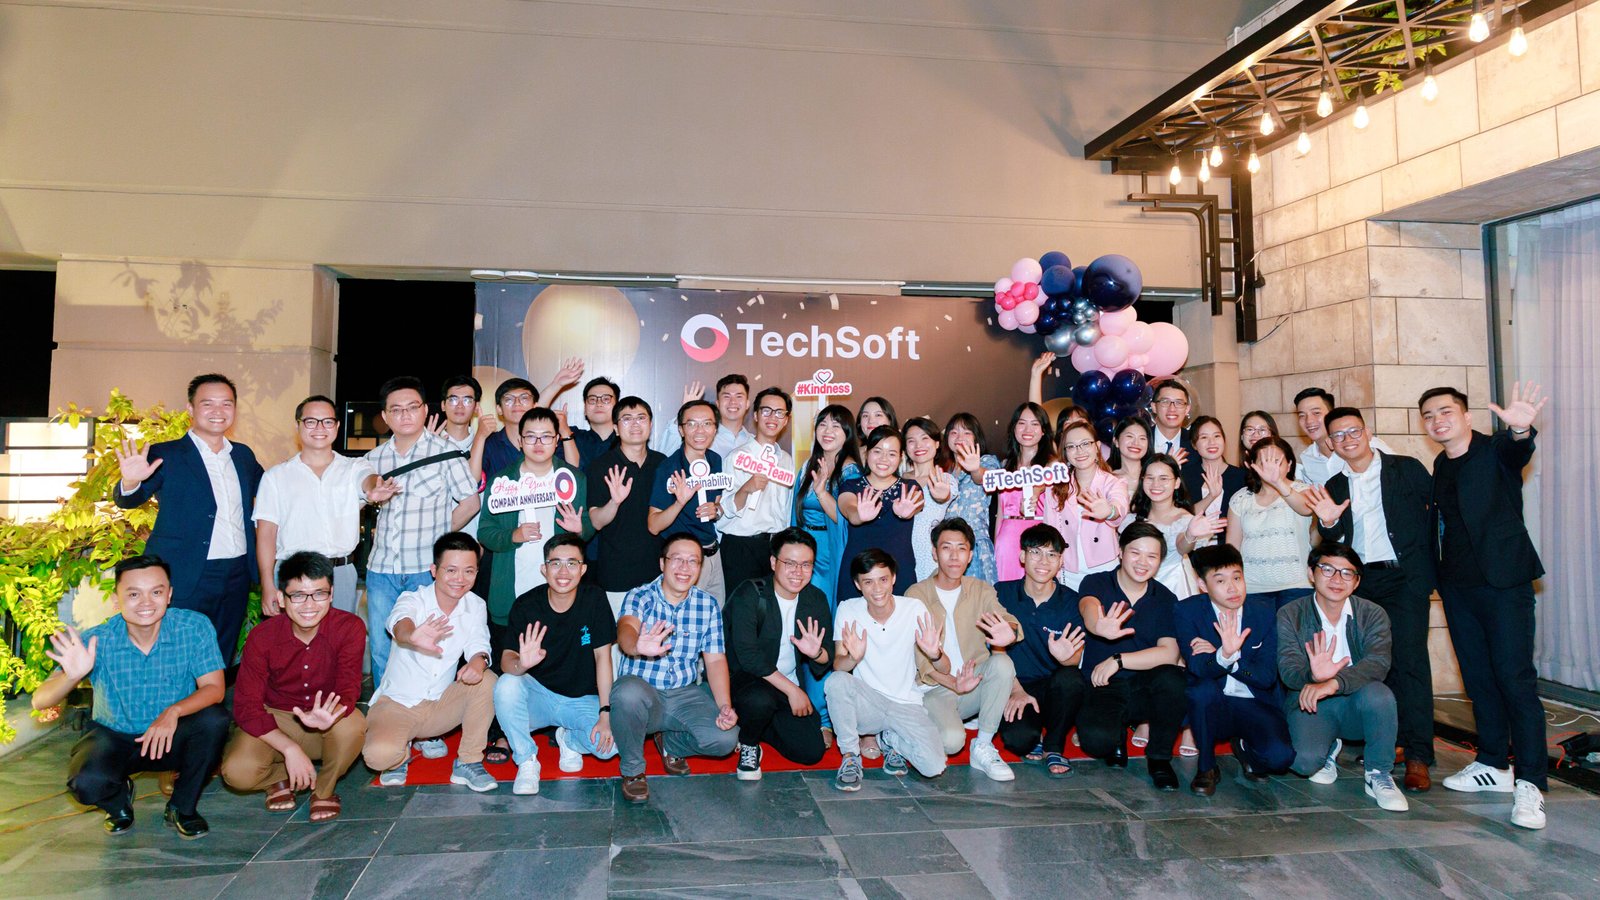 TechSoft’s Journey: Celebrating One Year of Growth, Development and Achievements